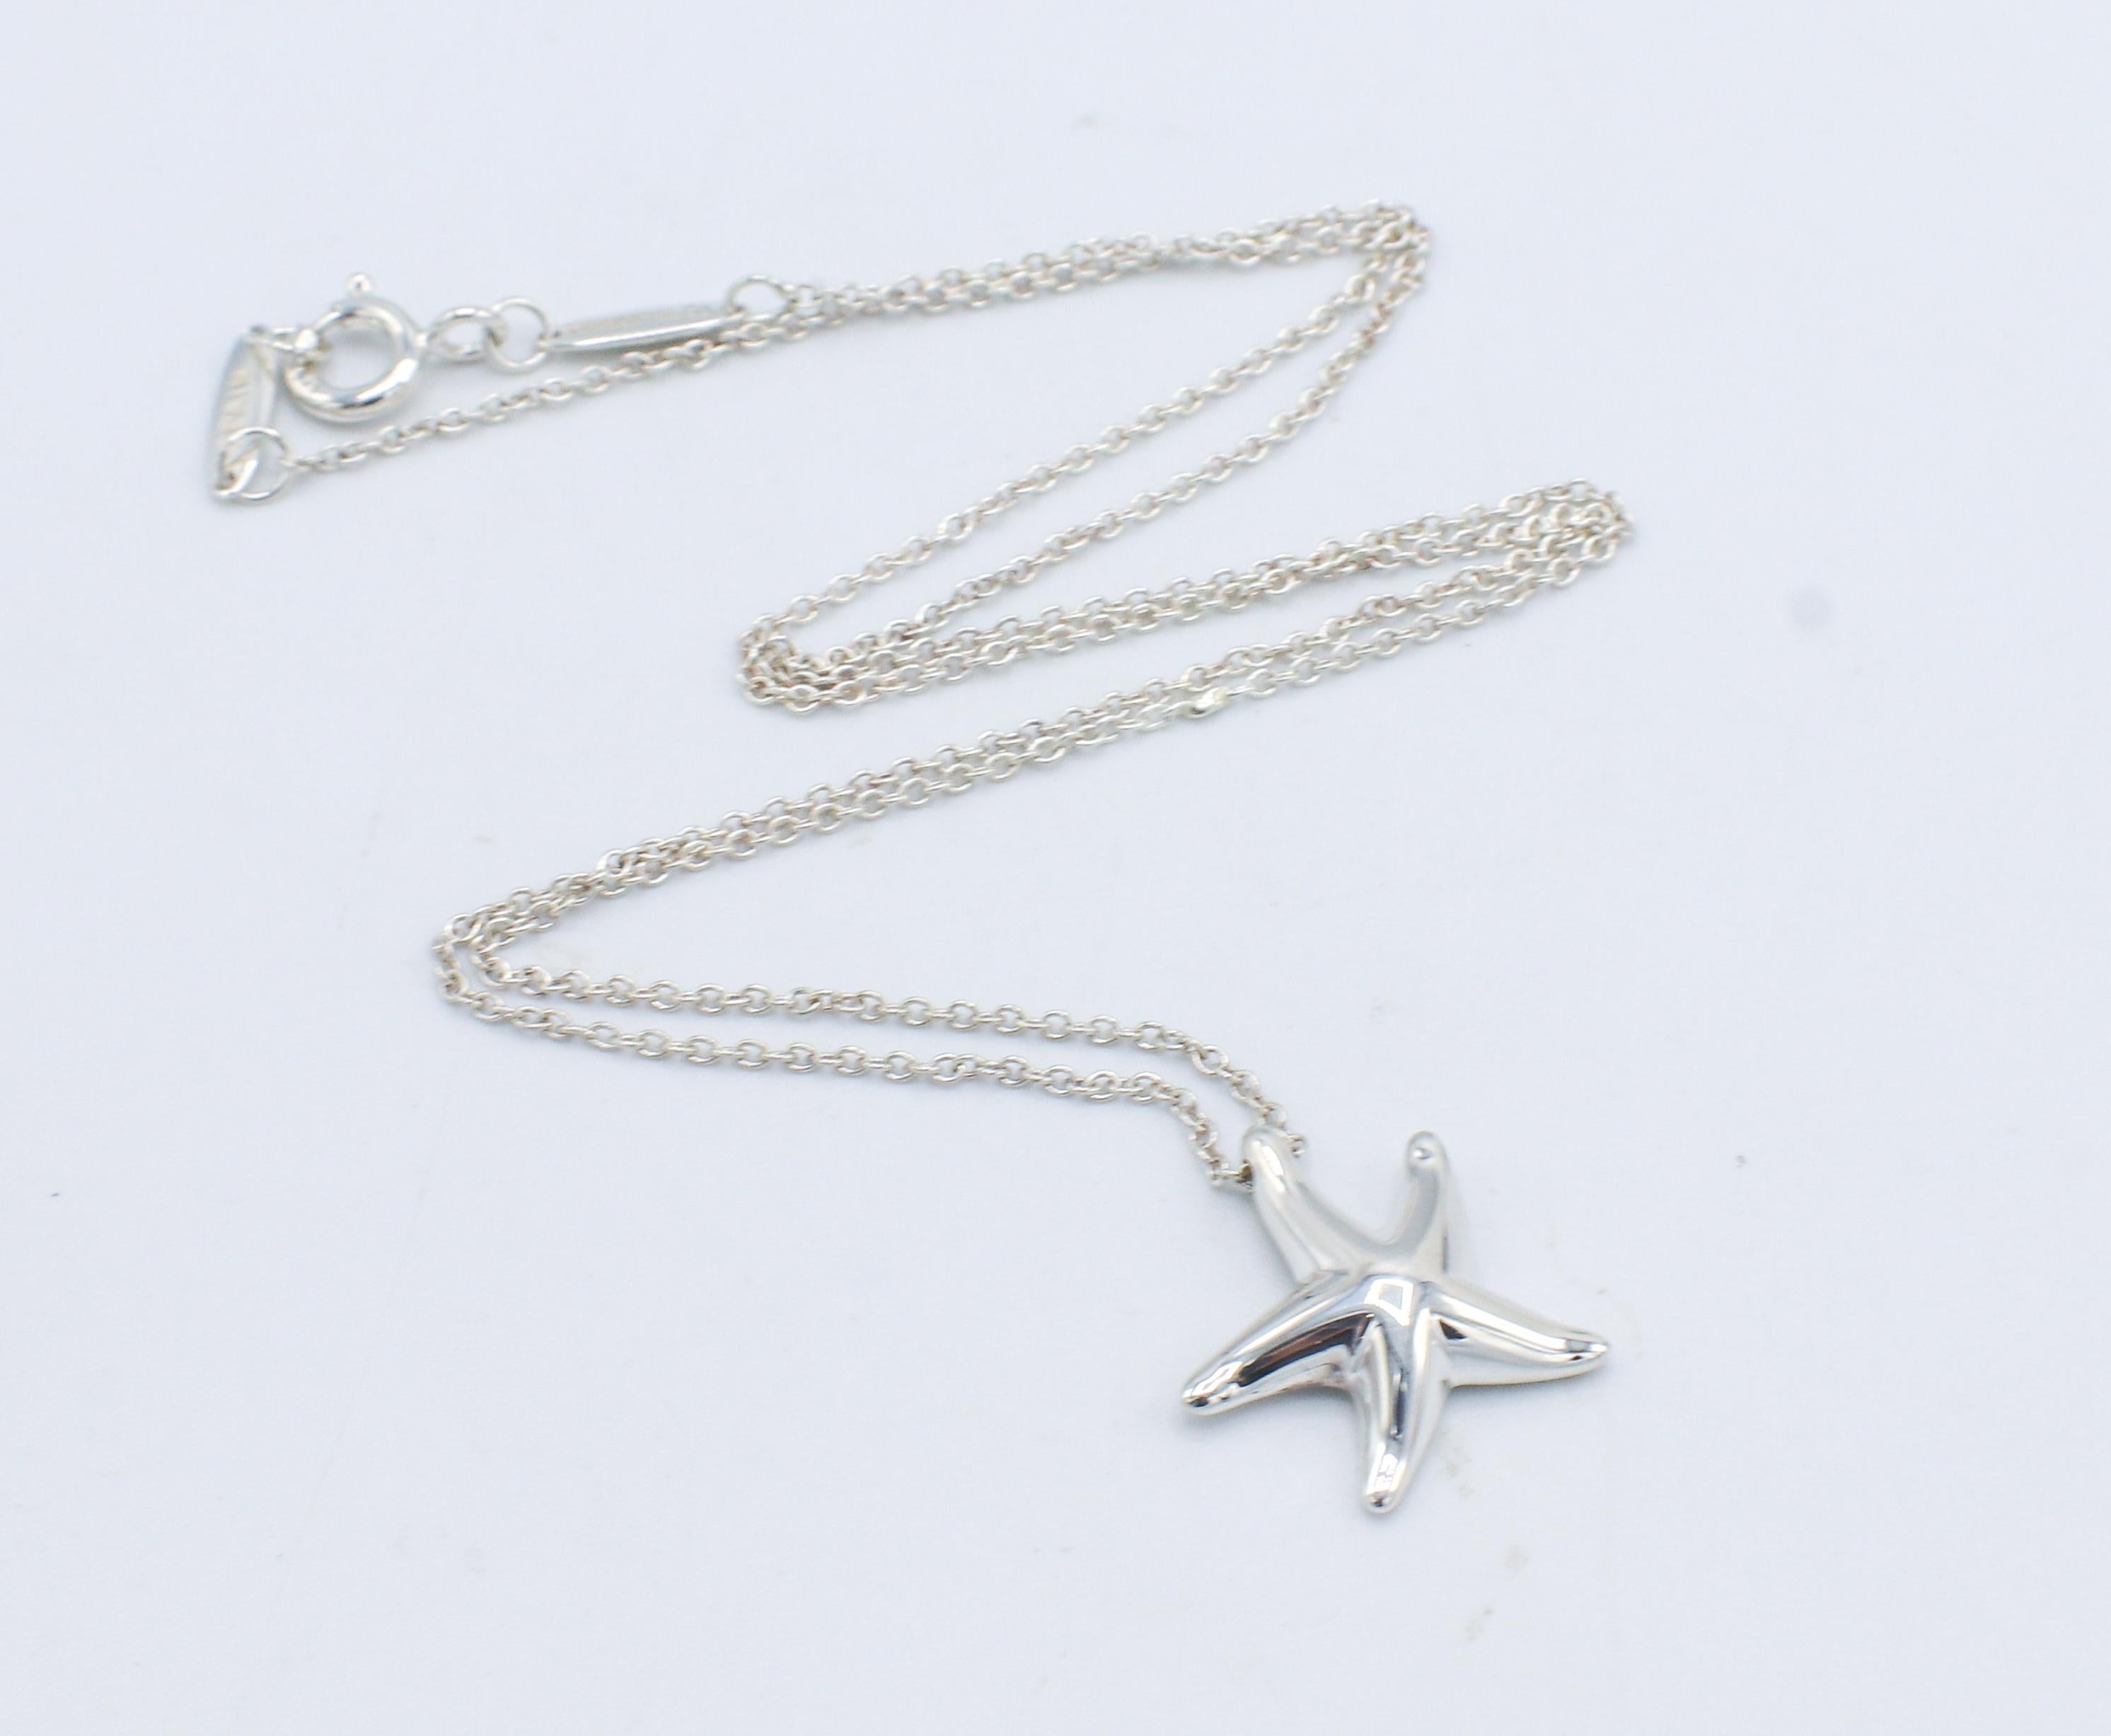 Tiffany & Co. Elsa Peretti Sterling Silver Starfish Pendant Necklace 
Metal: Sterling silver
Weight: 2.86 grams
Pendant: 14 x 14.5mm
Chain length: 16 inches
Retail: $350
